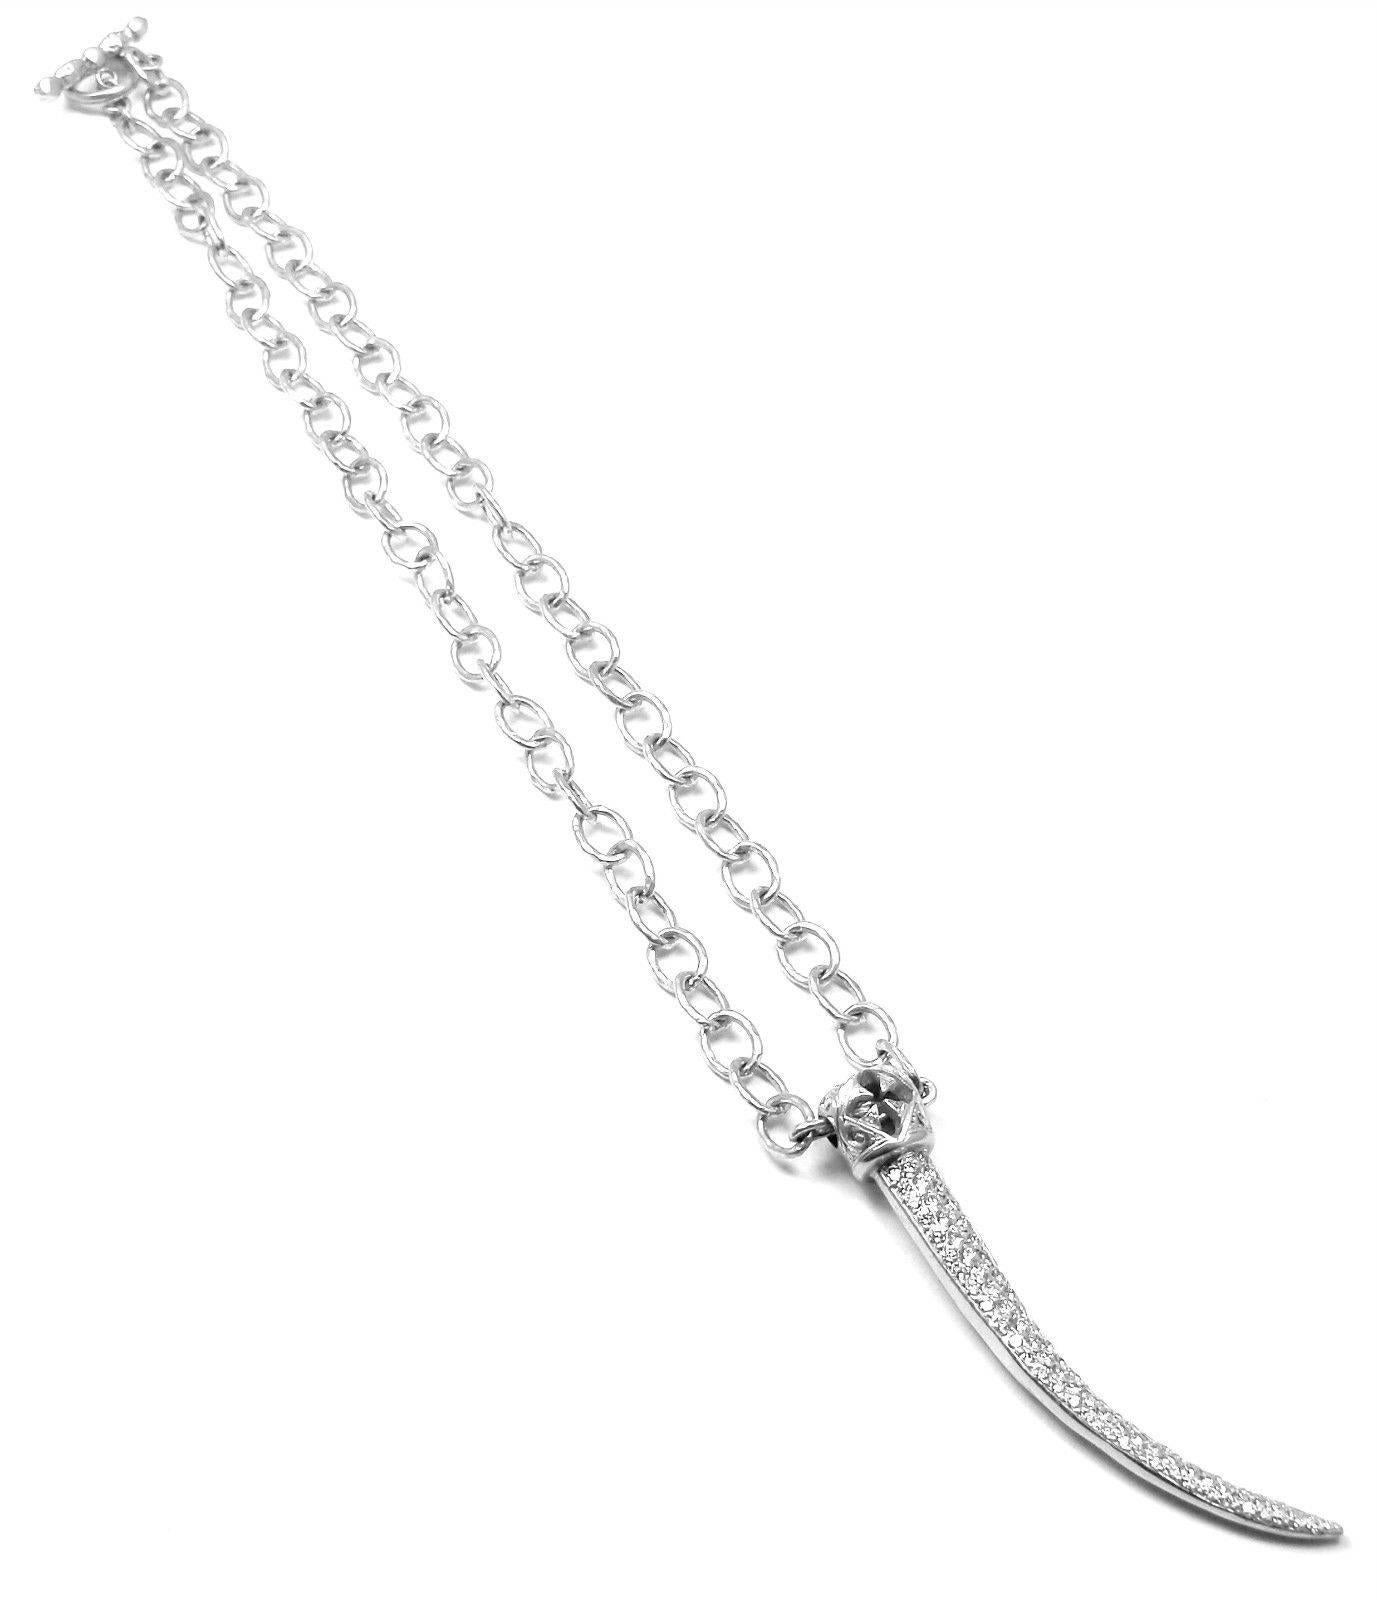 Loree Rodkin Claw Diamond Gold Pendant Necklace from Estate of Jackie Collins 2